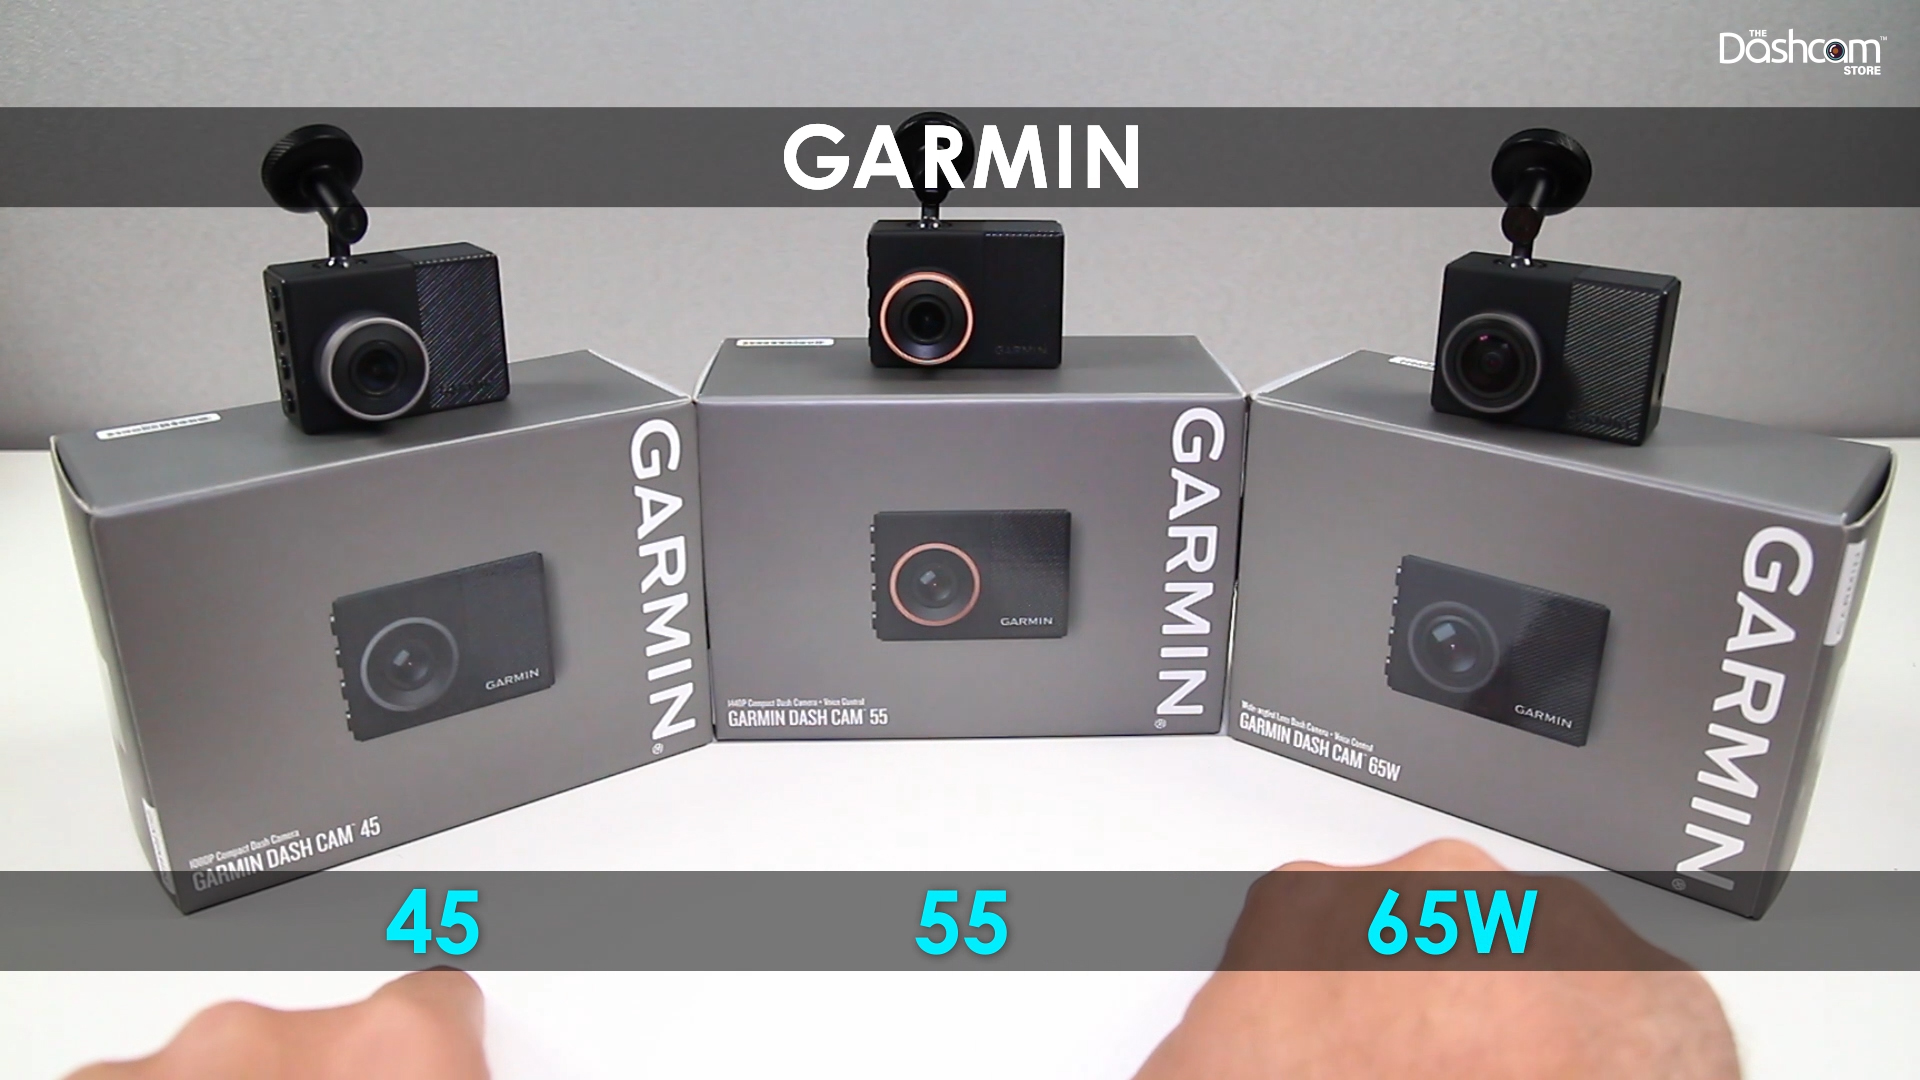 Lake Taupo Springboard tynd Garmin 45 / 55 / 65W Dashcam Unboxing | Pictures and Video - The Dashcam  Store